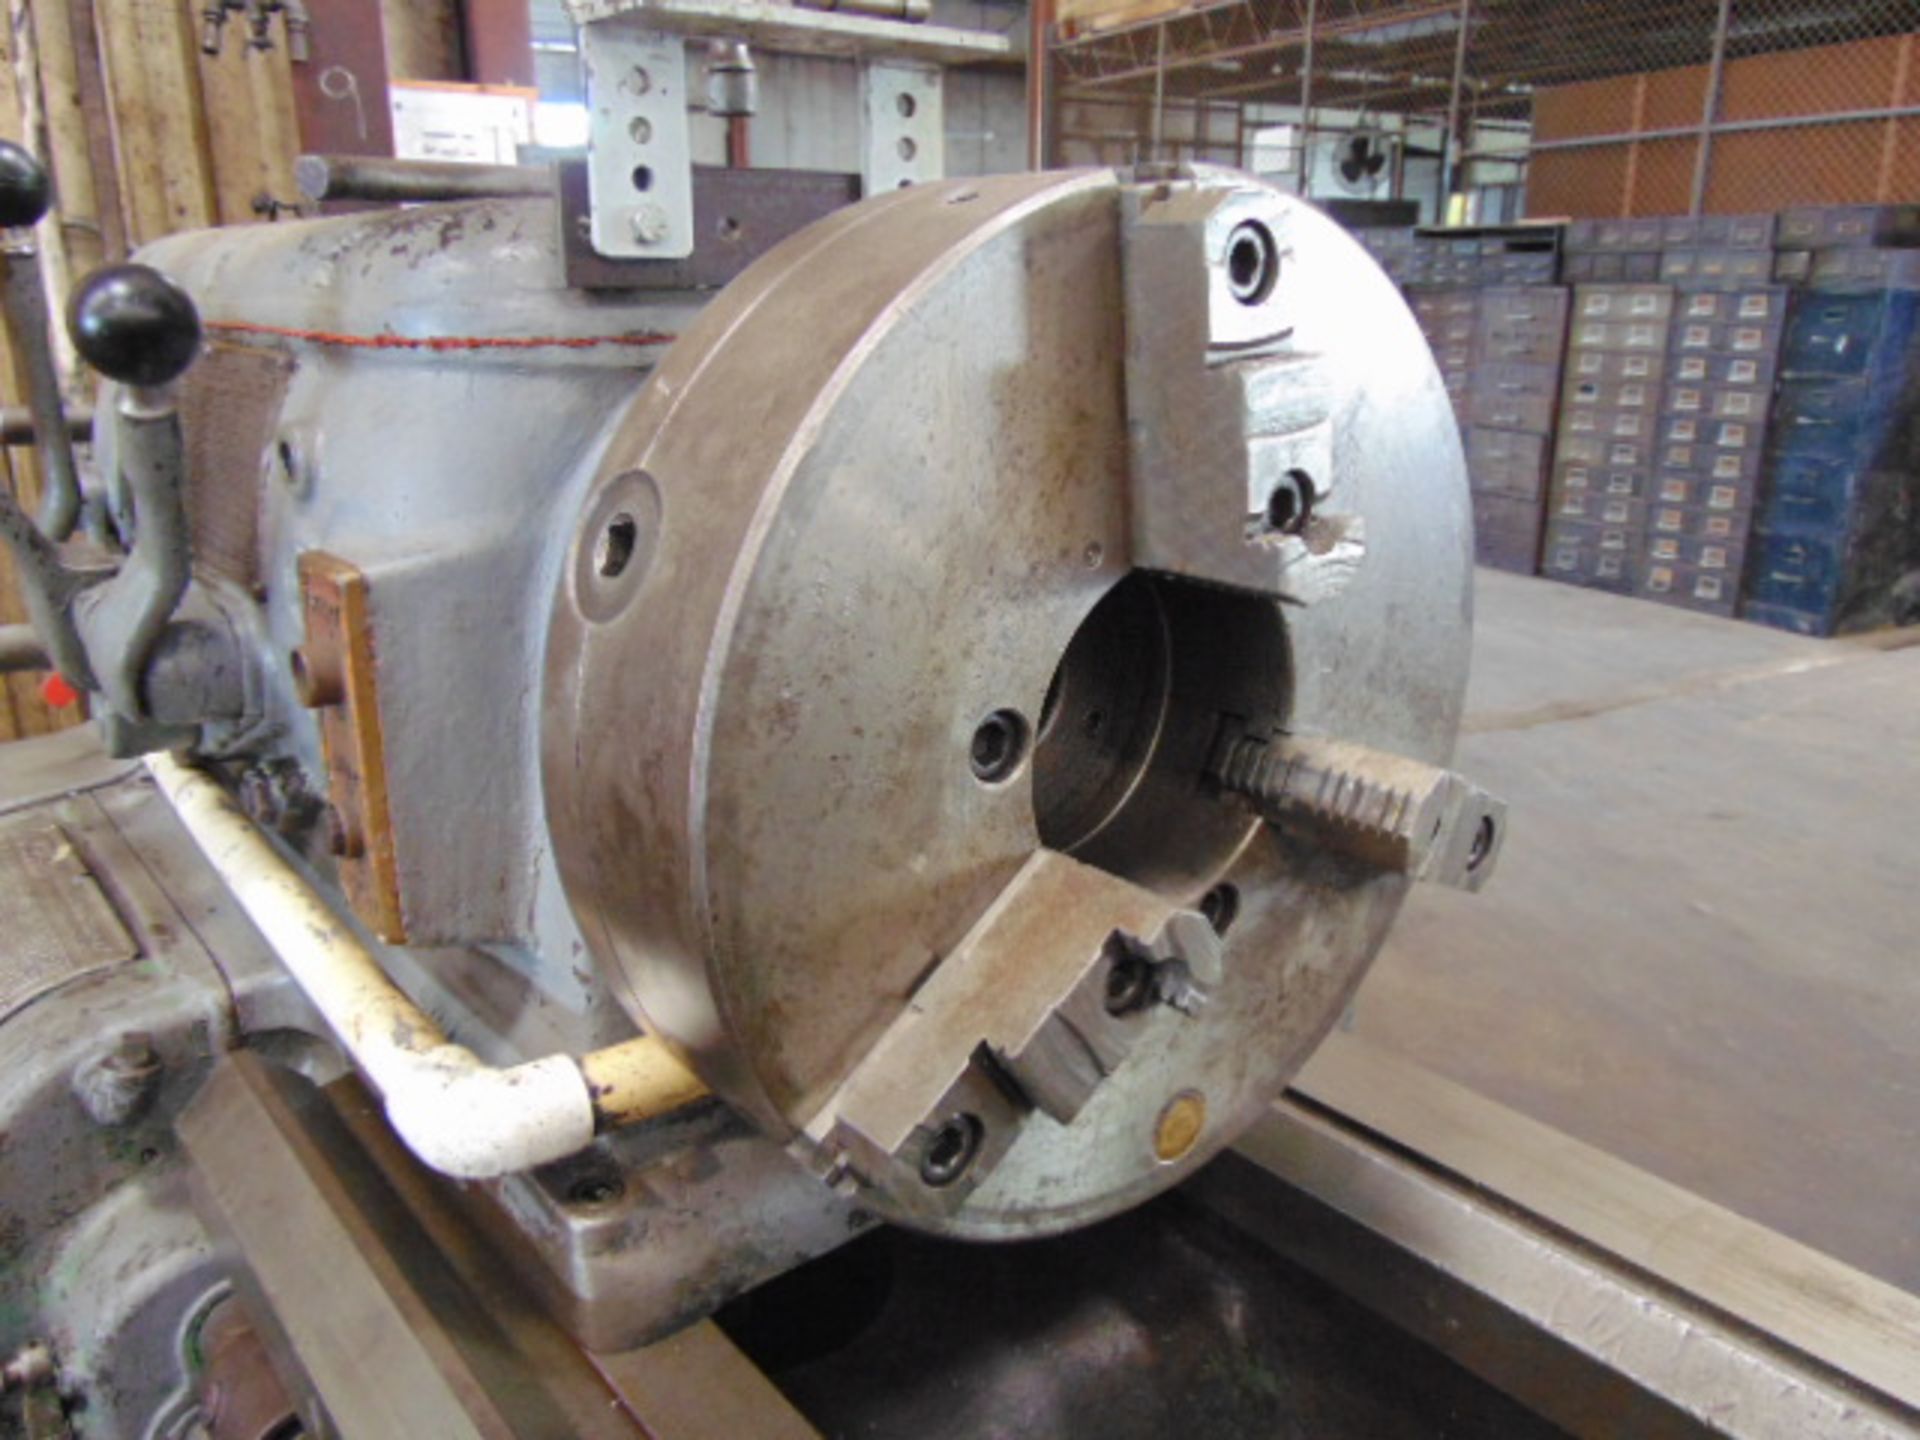 ENGINE LATHE, AXELSON SIZE 2516, 25” max. swing, 120” centers, spdl. spds: 9.5-961 RPM, 2-1/2” spdl. - Image 5 of 10